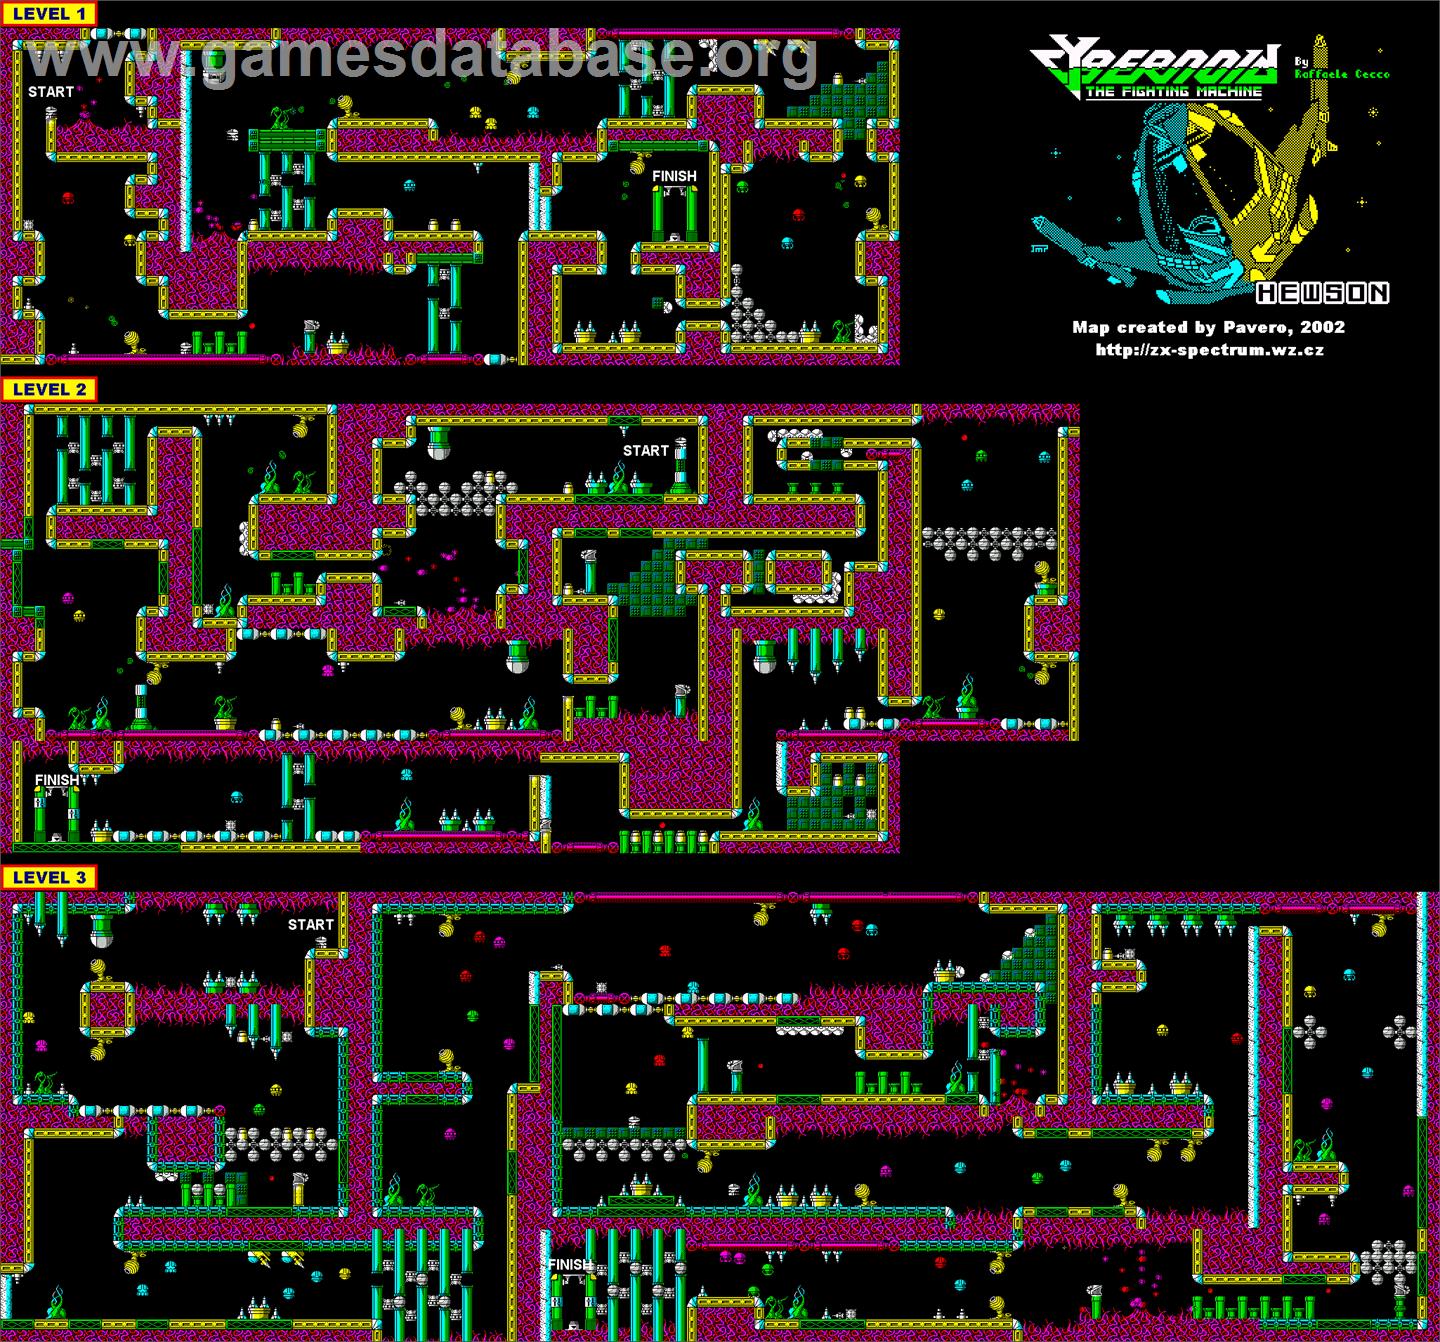 Cybernoid: The Fighting Machine - Amstrad CPC - Artwork - Map